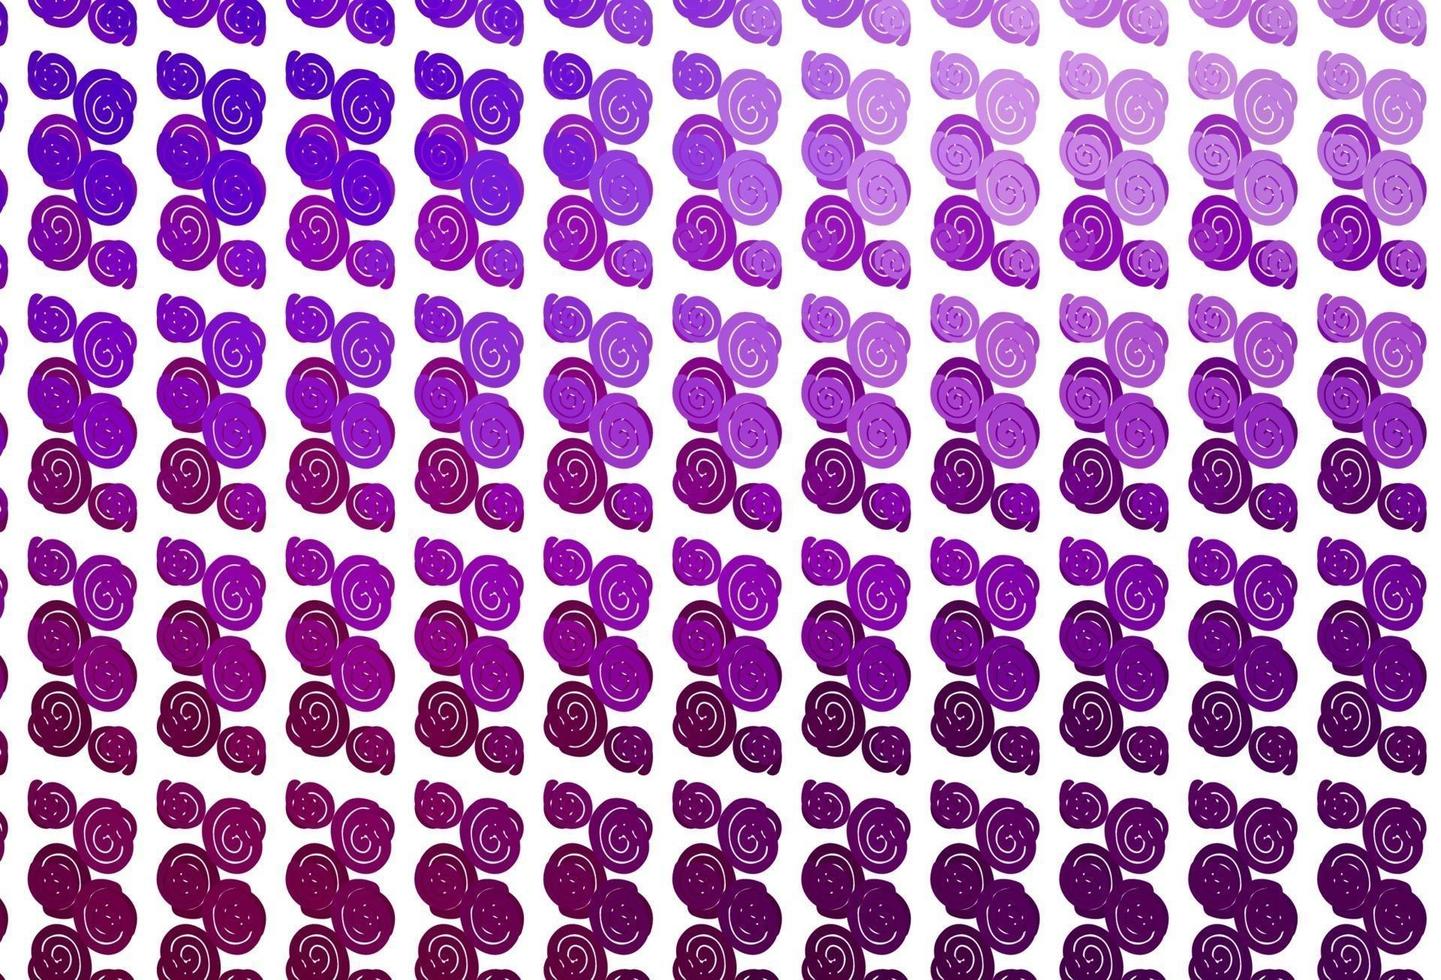 Light Purple vector background with liquid shapes.